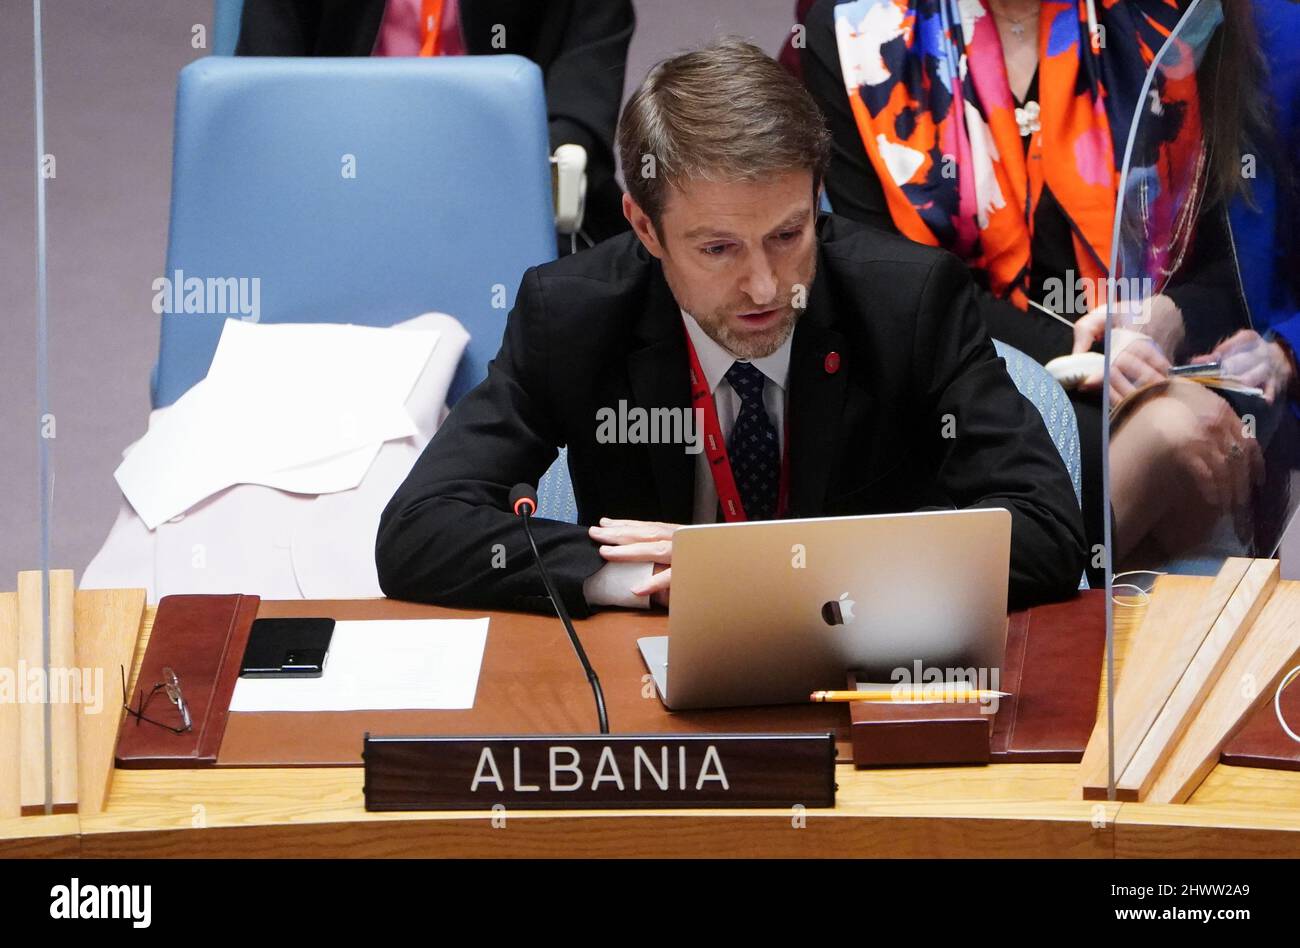 Albania's Ambassador to the U.N. Ferit Hoxha speaks during a meeting of the United Nations Security Council on Threats to International Peace and Security, following Russia's invasion of Ukraine, in New York City, U.S., March 7, 2022. REUTERS/Carlo Allegri Stock Photo